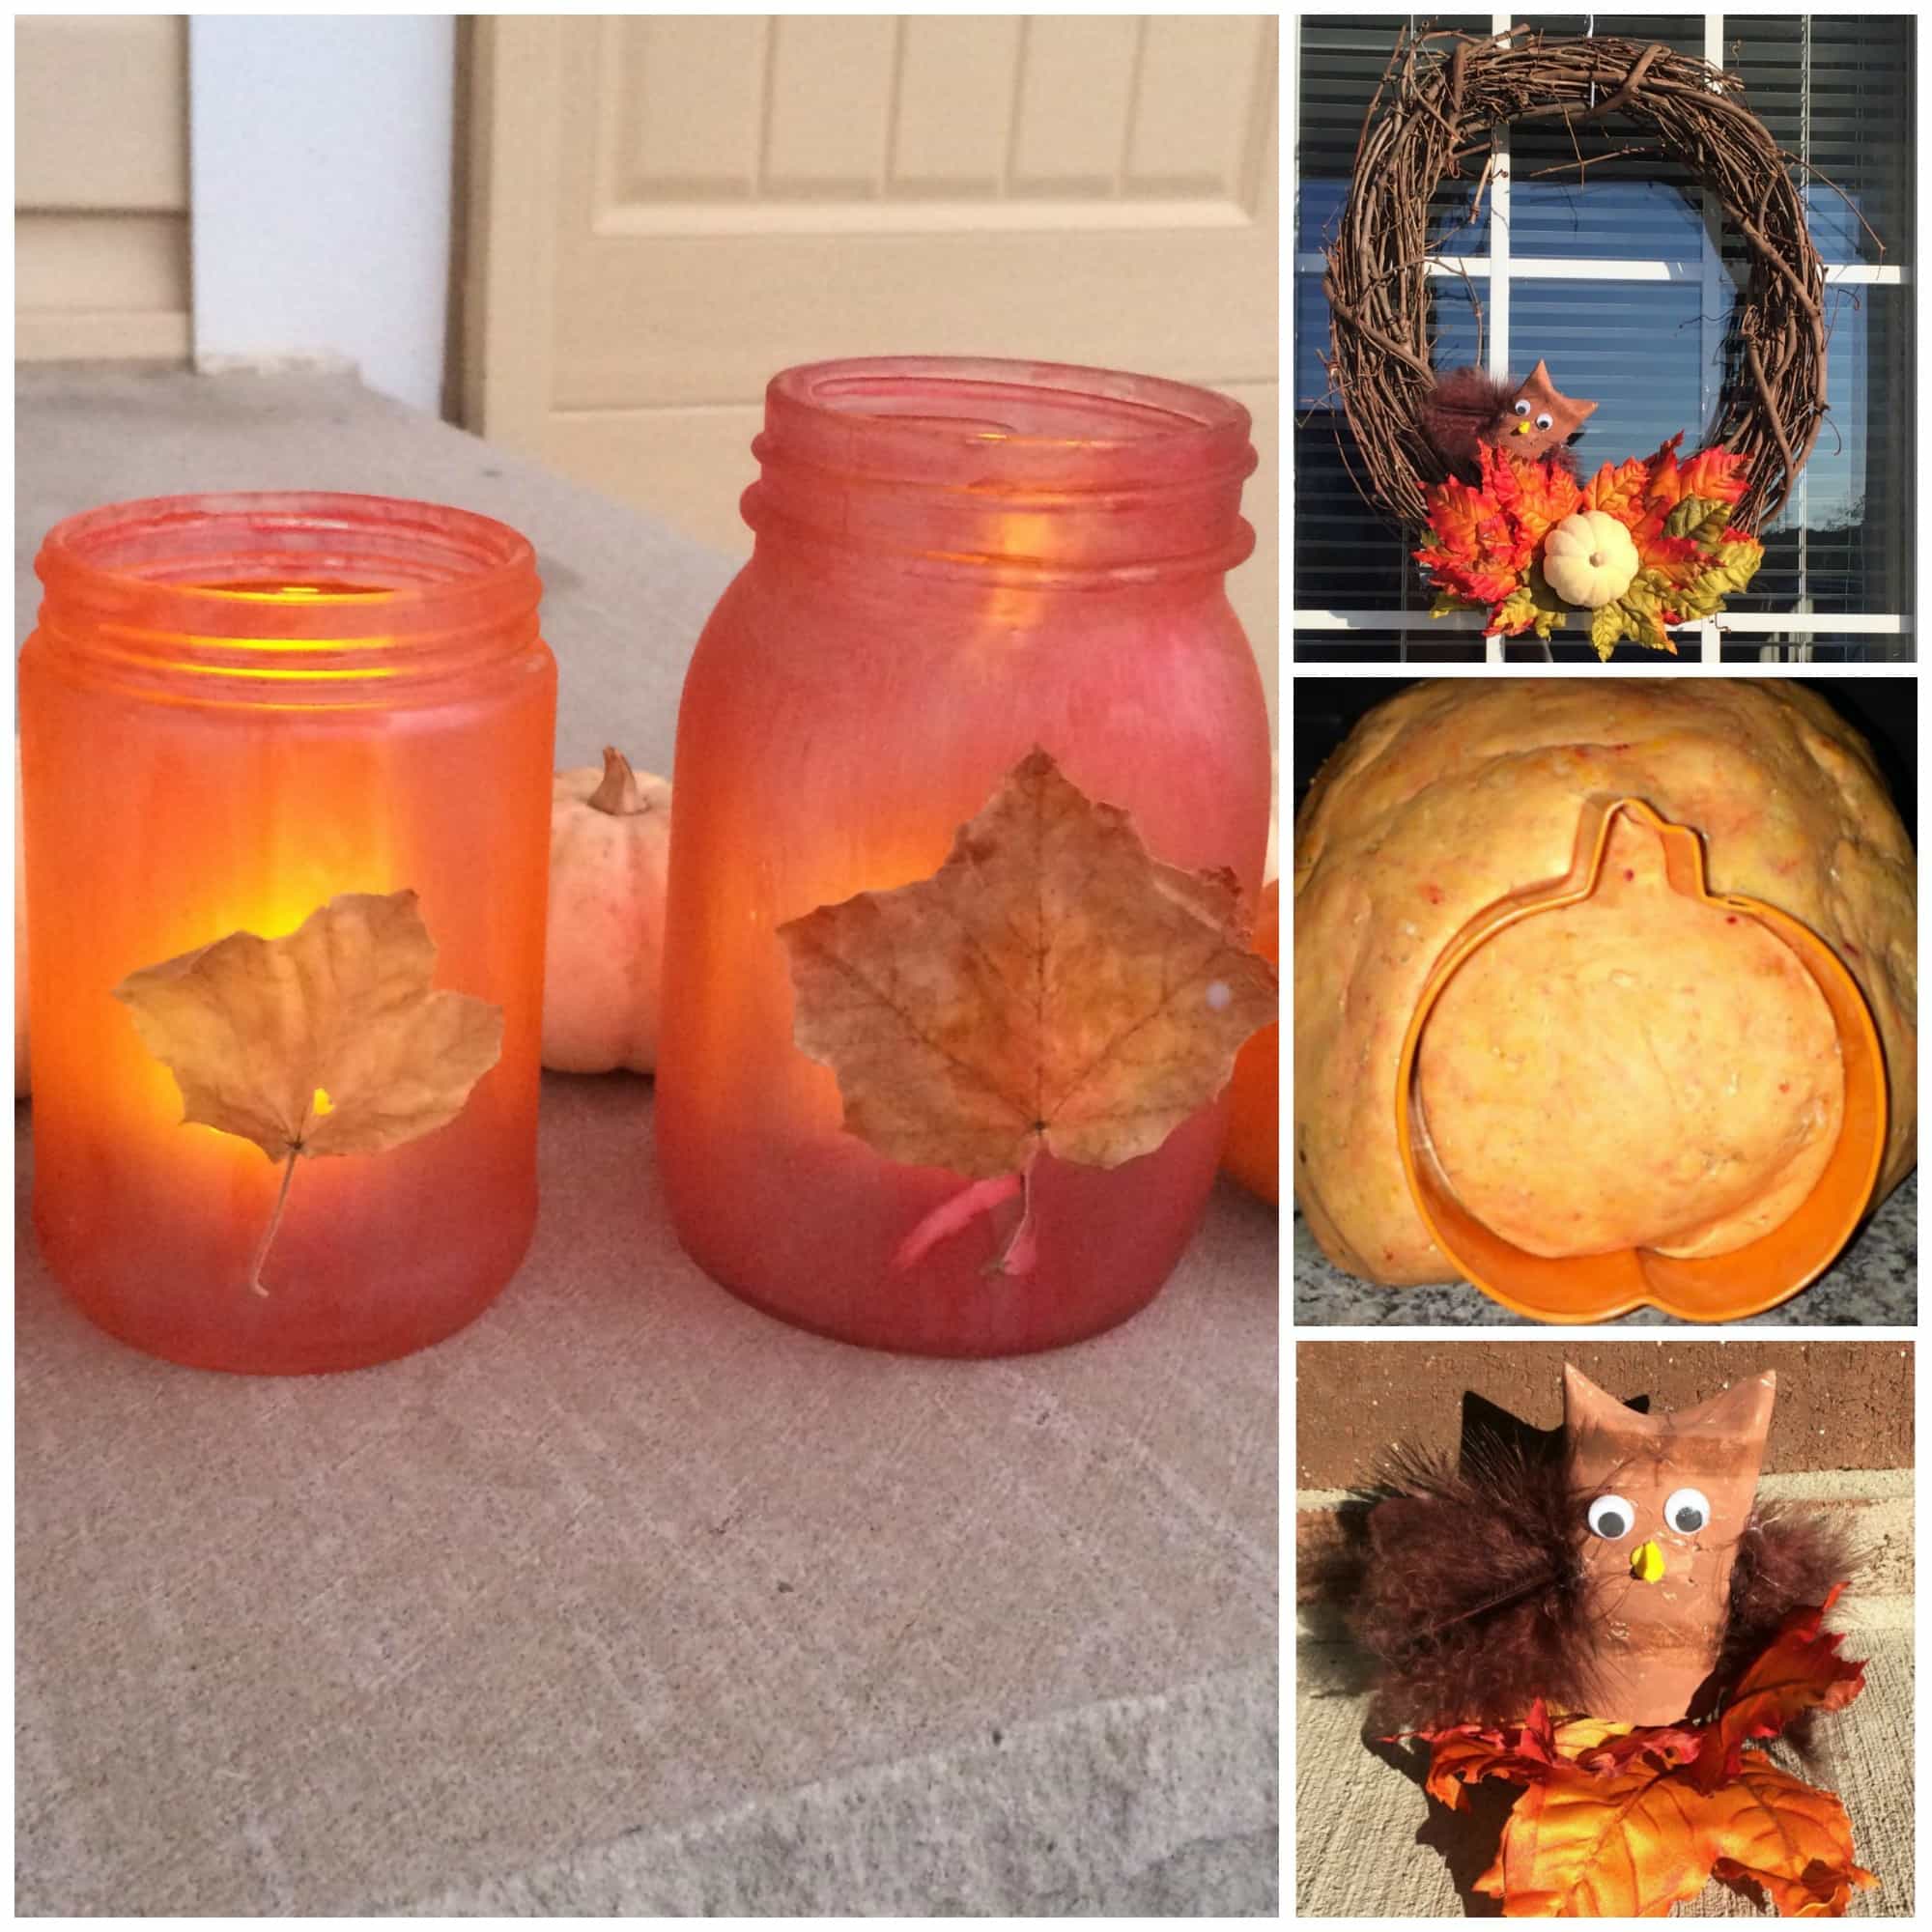 These Fall Toddler activities are REALLY easy to set up and your toddler can do with minimal help! Make Fall Lanterns, engage in sensory play using pumpkin play dough, make a 1 minute Fall wreath, toilet paper roll owls and more! Play based learning, learning through play, toddlers, preschoolers, Fall fun.